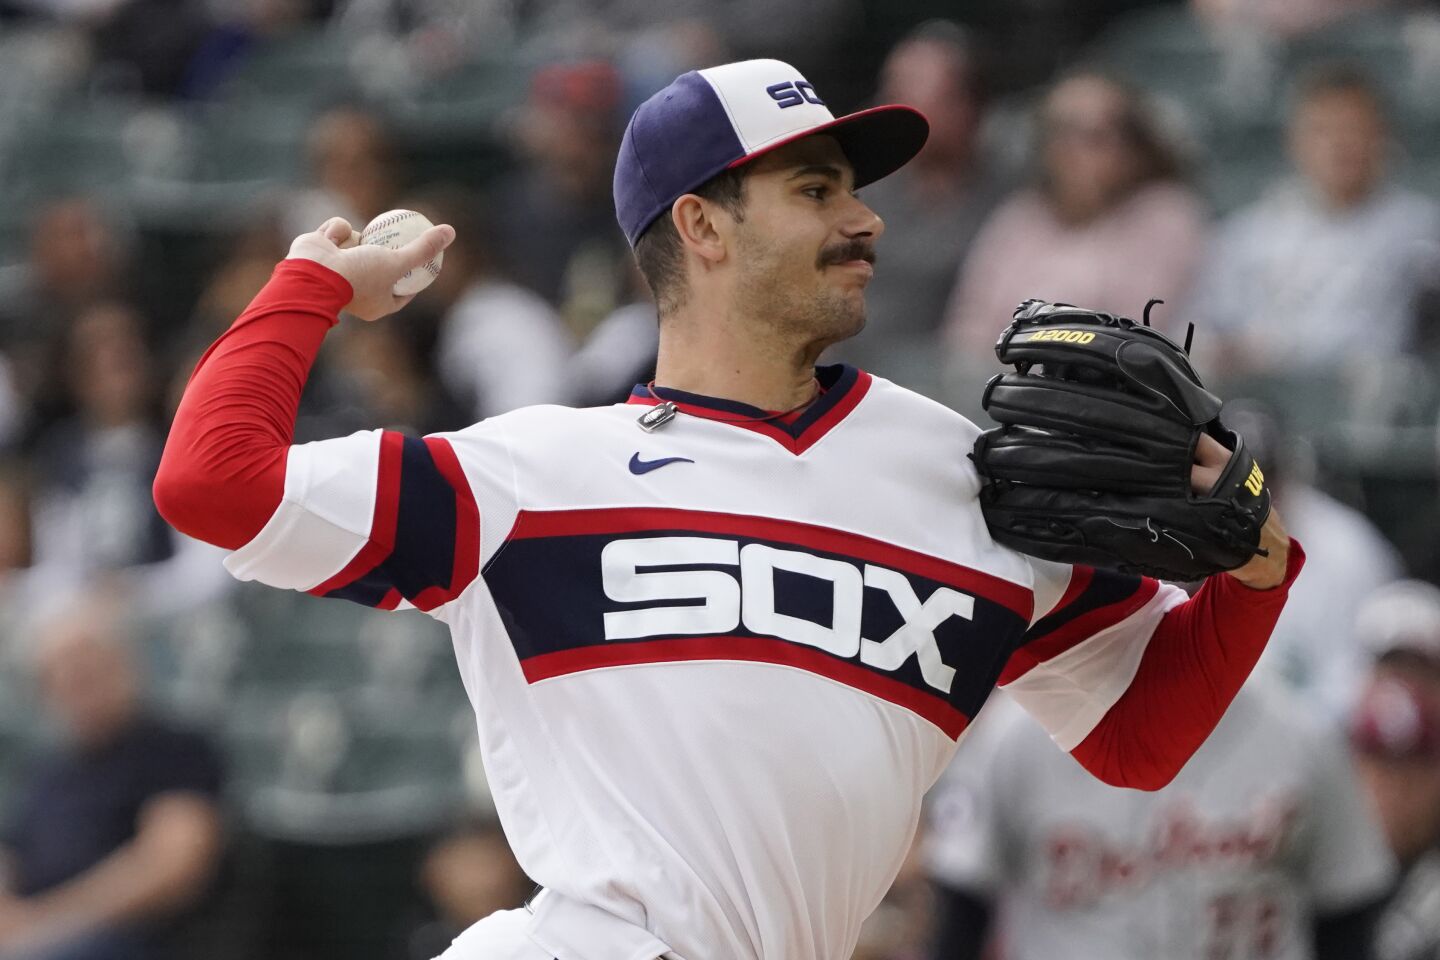 Game 2: White Sox RHP Dylan Cease (14-7, 2.06 ERA)His MLB-worst 74 walks are a blemish on what is otherwise an impressive AL Cy Young resume. He has struck out 222 batters in 179 innings. This is Cease’s first career appearance against the Padres.